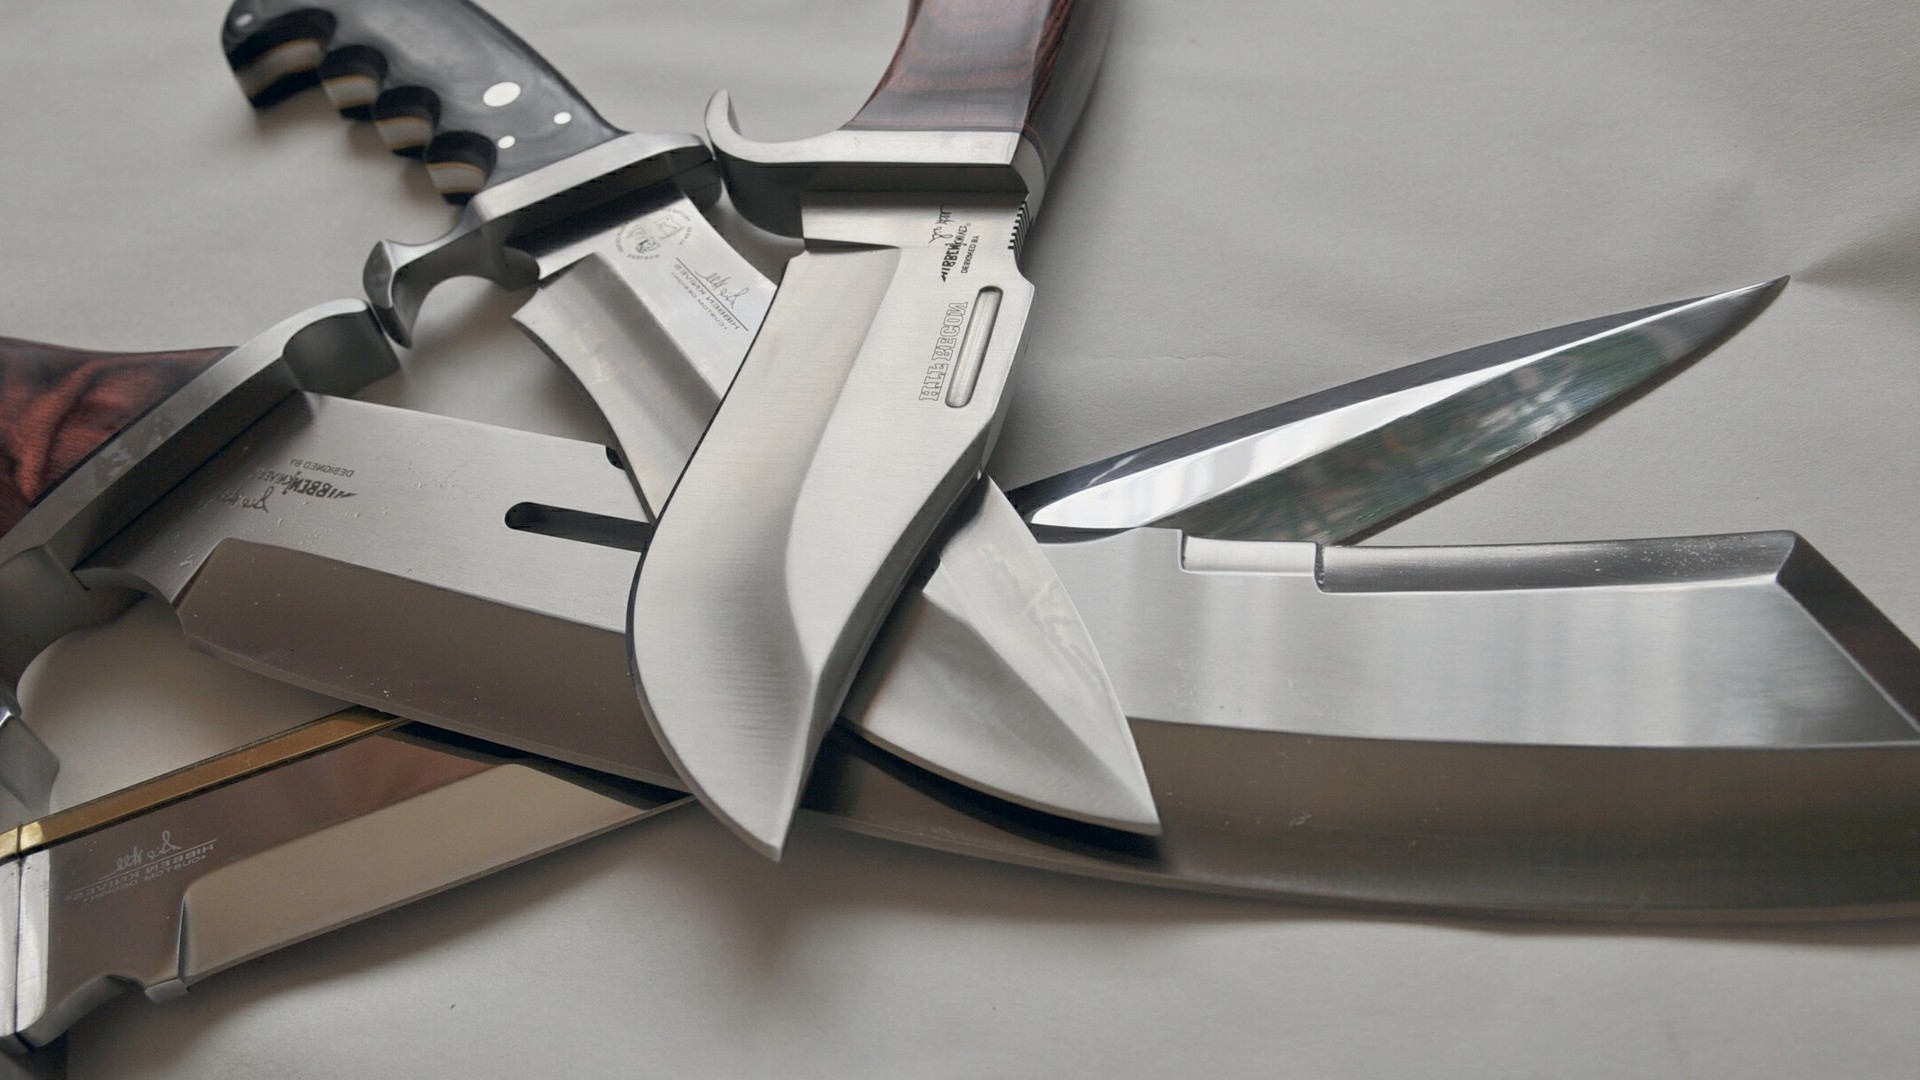 swords and blades knife steel sharp business glazed paper stainless steel chrome technology metallic